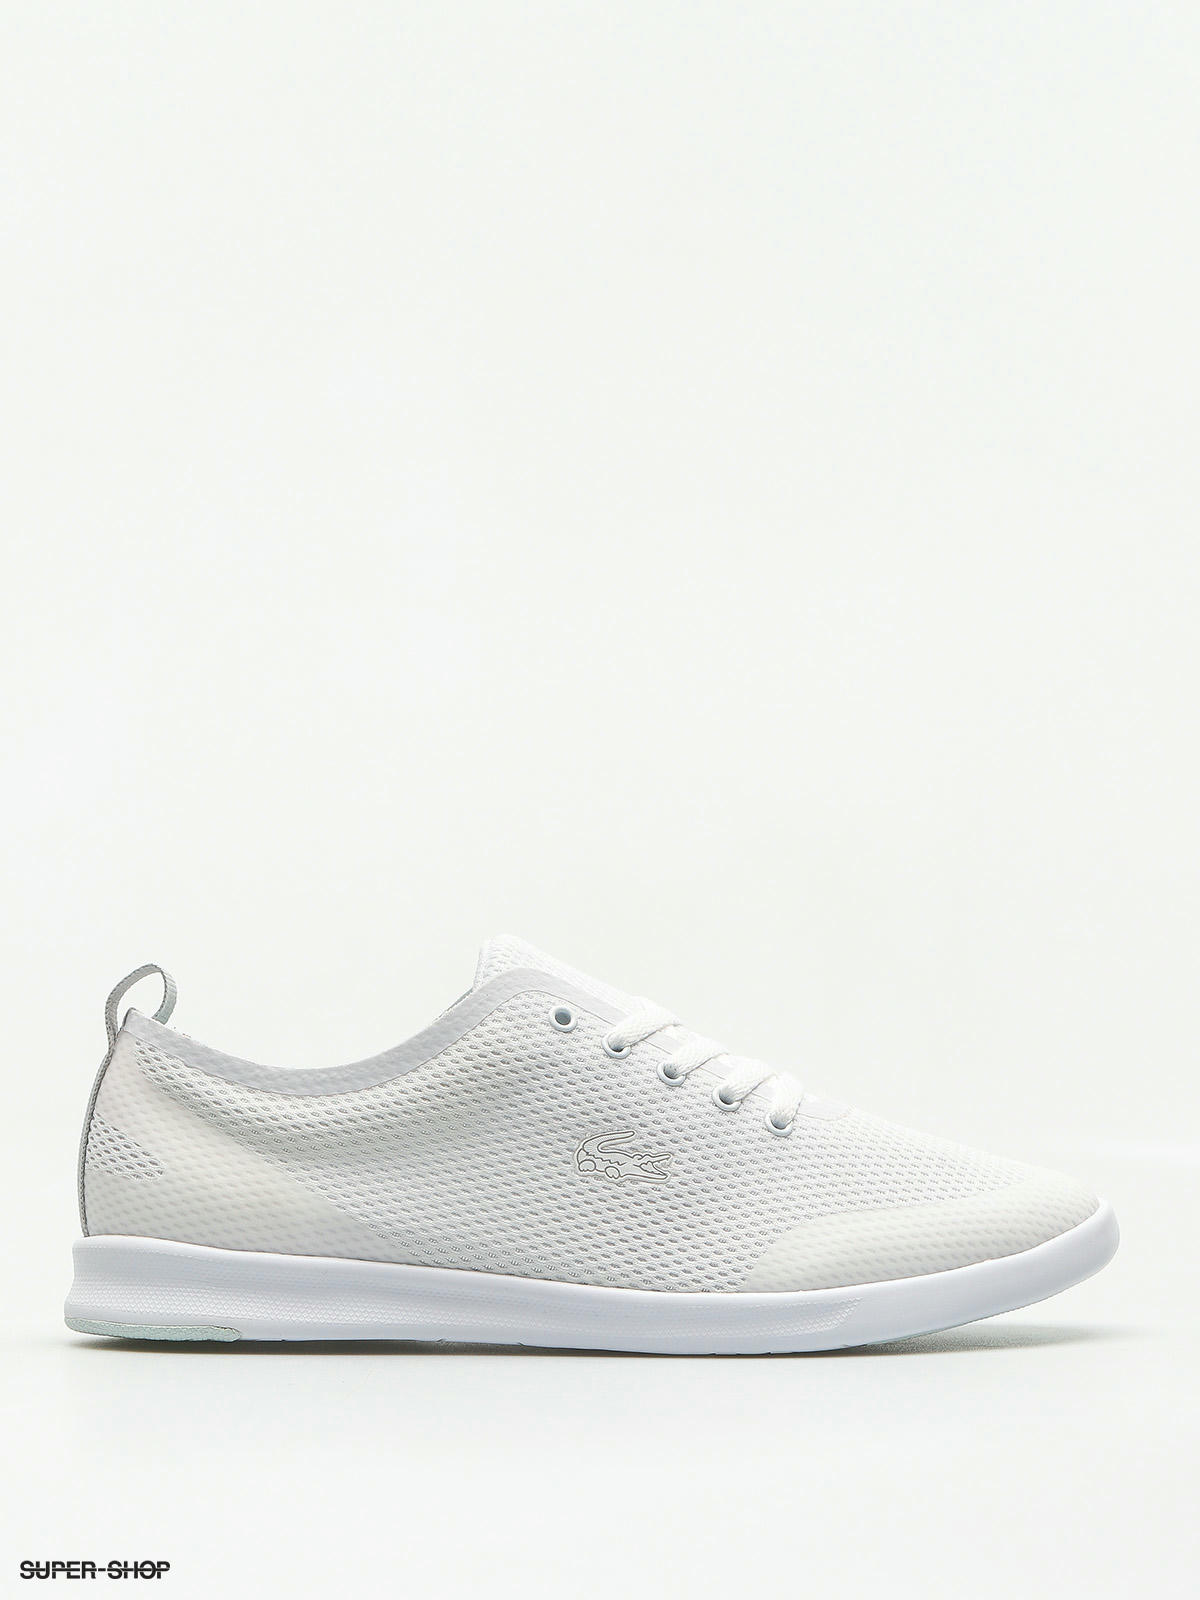 lacoste shoes white and blue